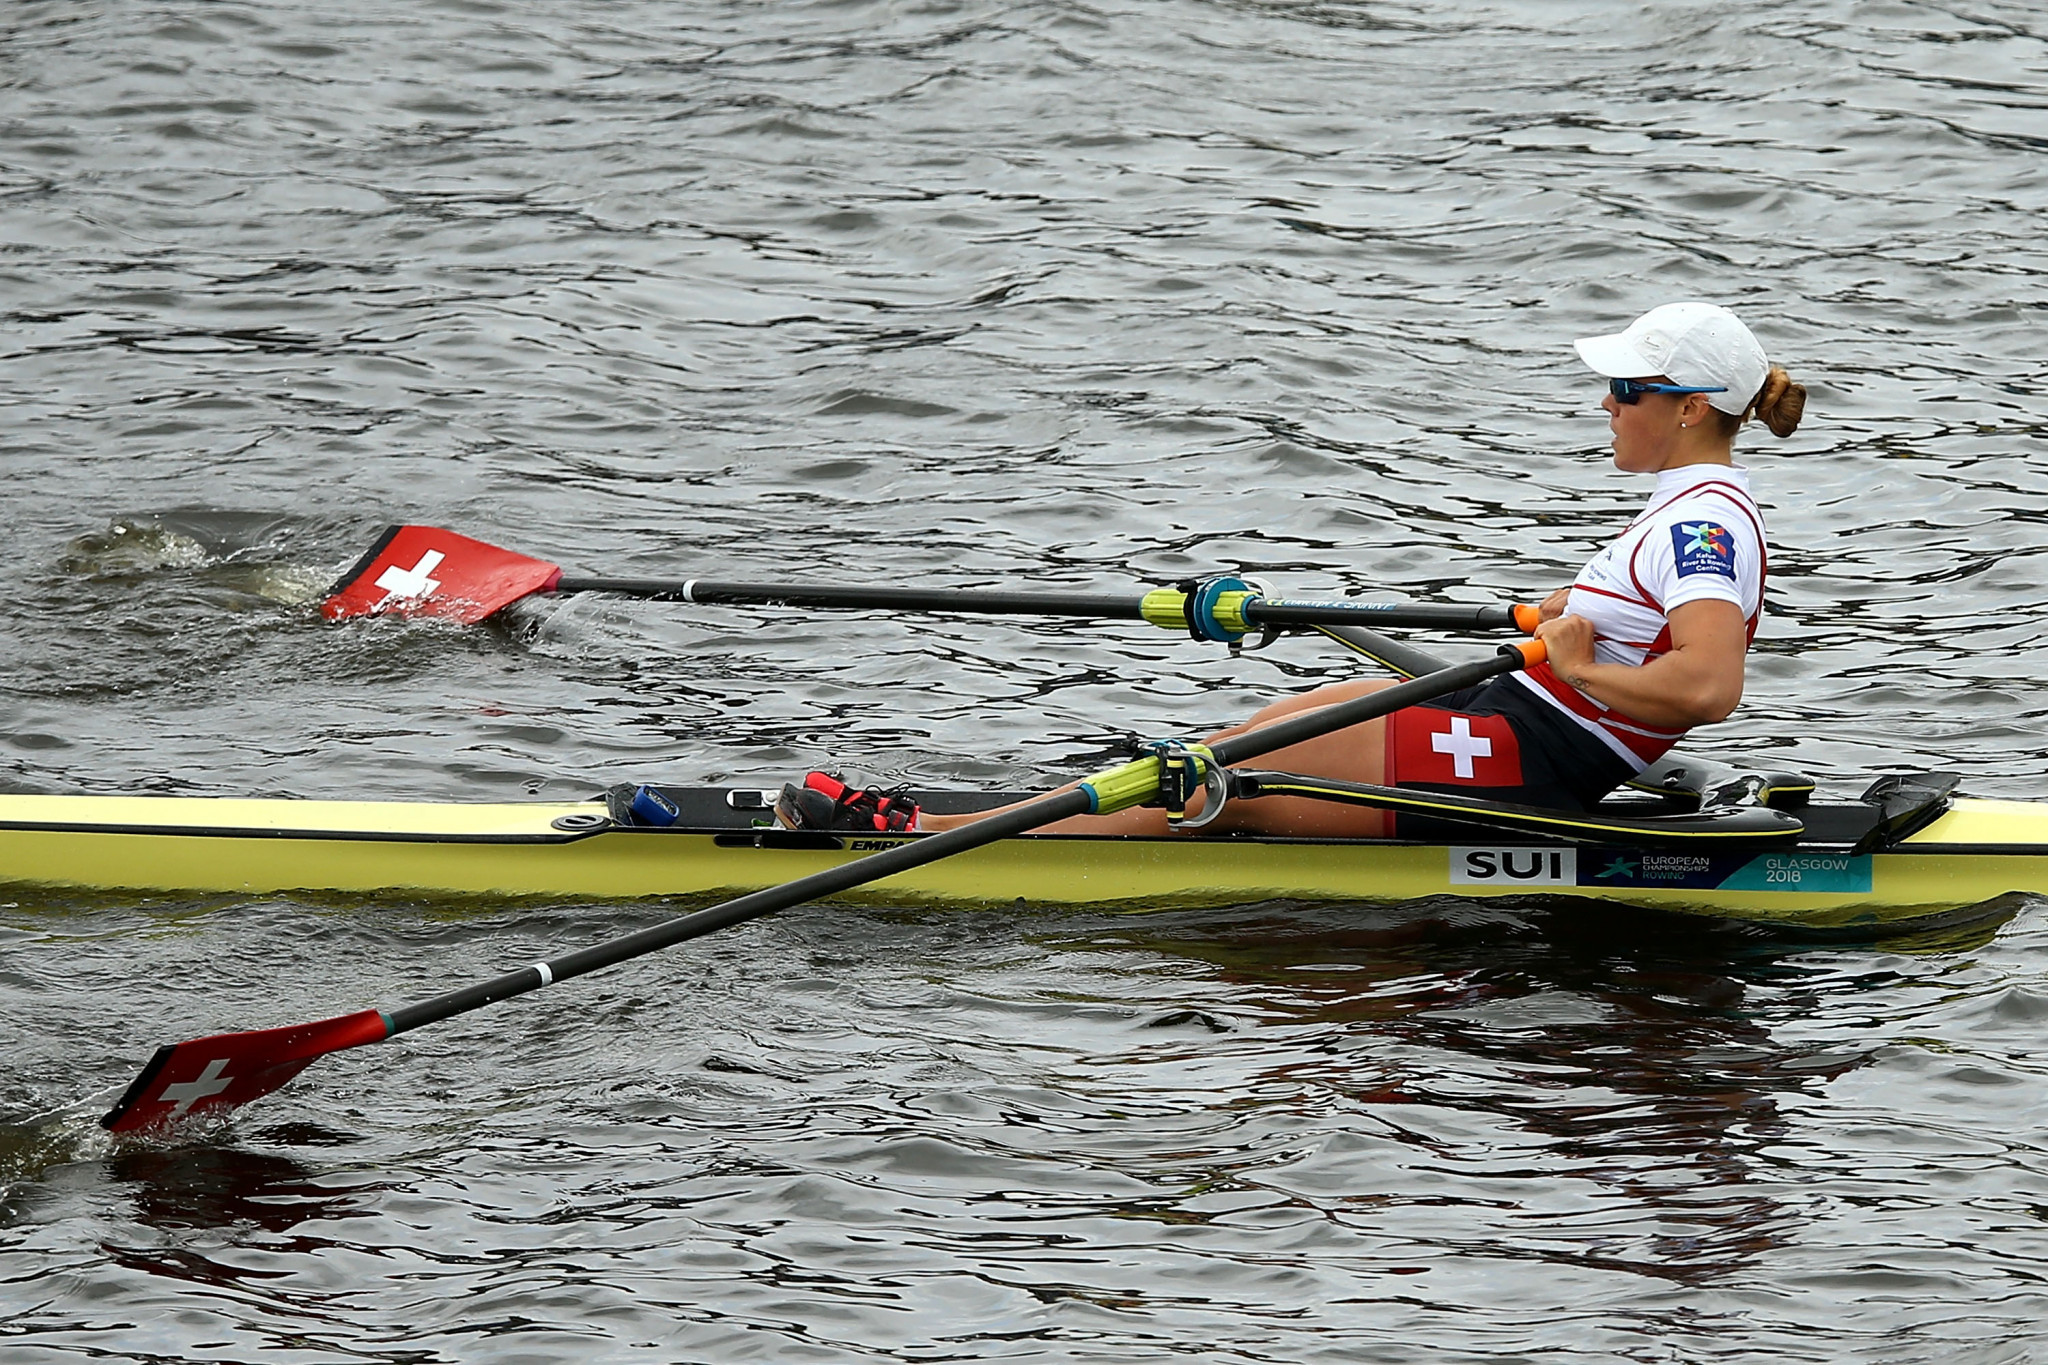 World champion Jeannine Gmelin won the women's single sculls competition ©Getty Images